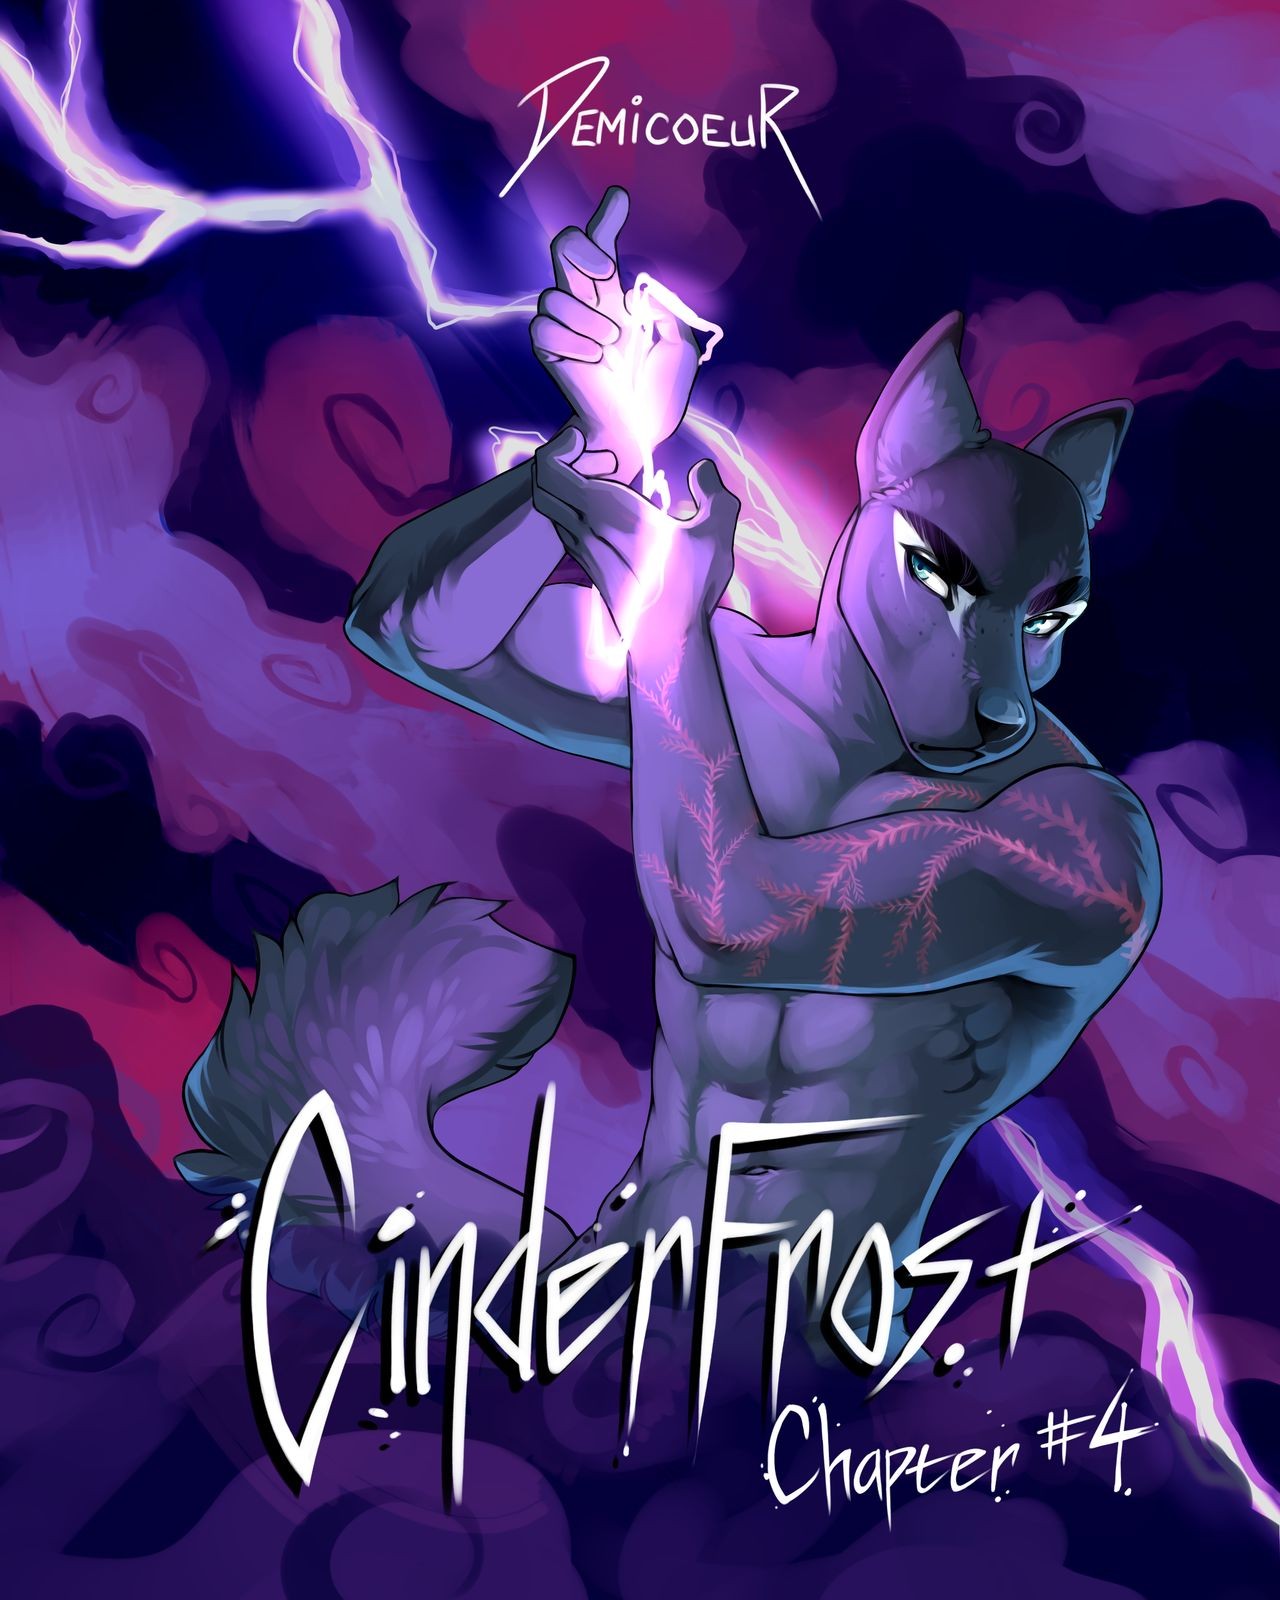 Demicoeur Cinderfrost Ongoing 108